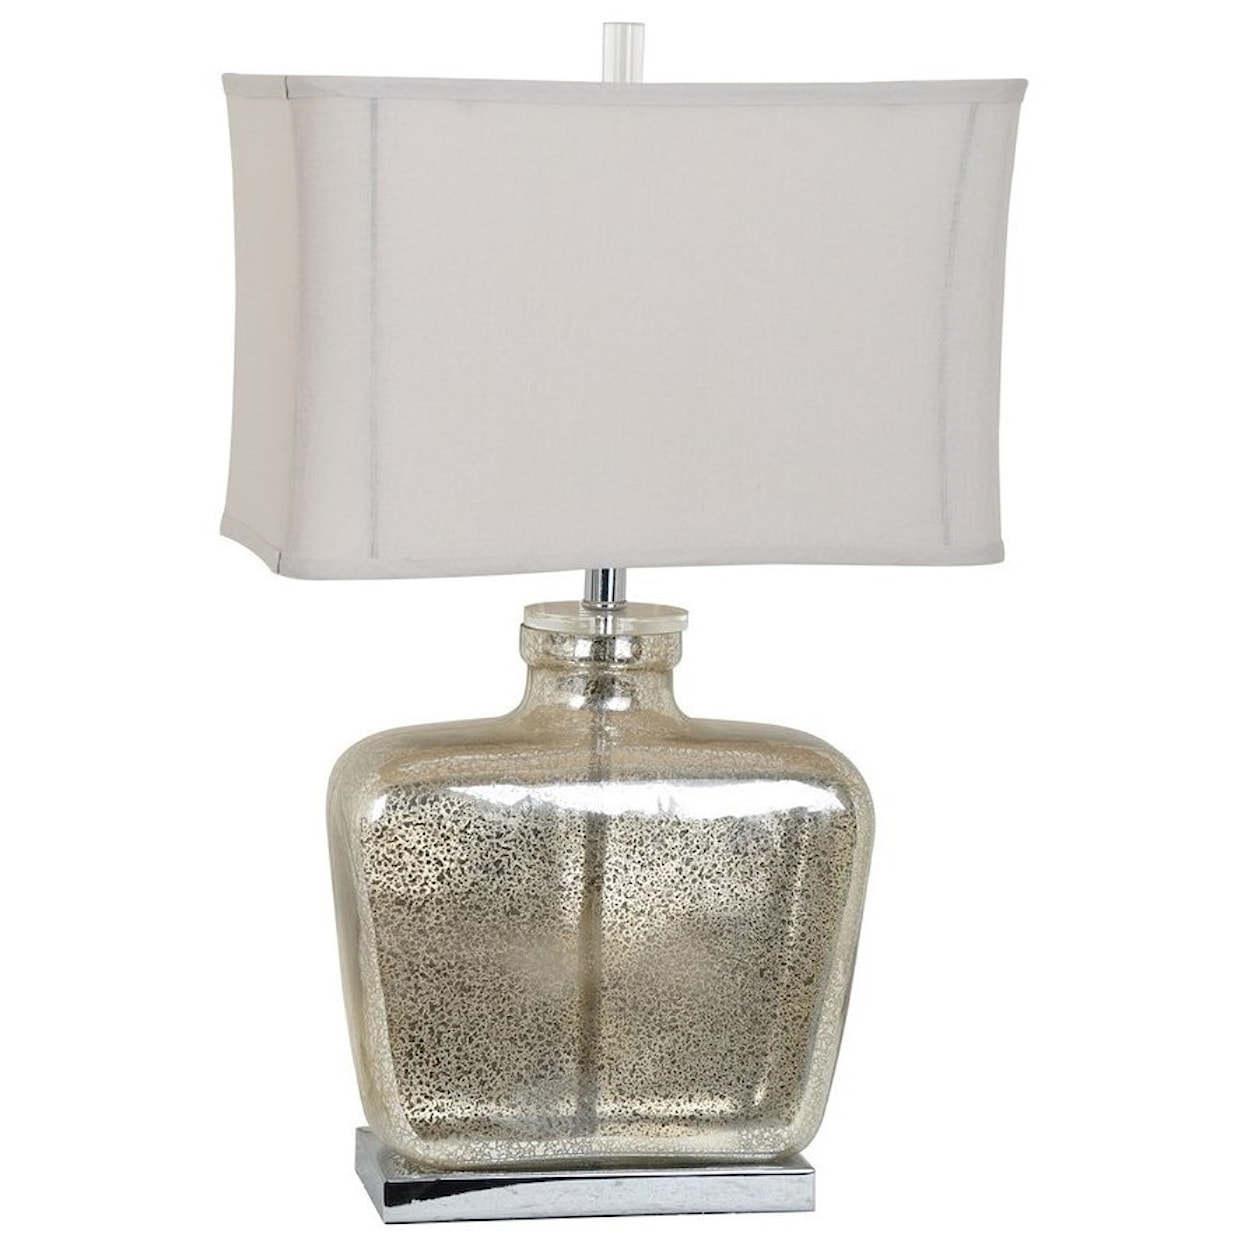 Crestview Collection Lighting Celine Table Lamp